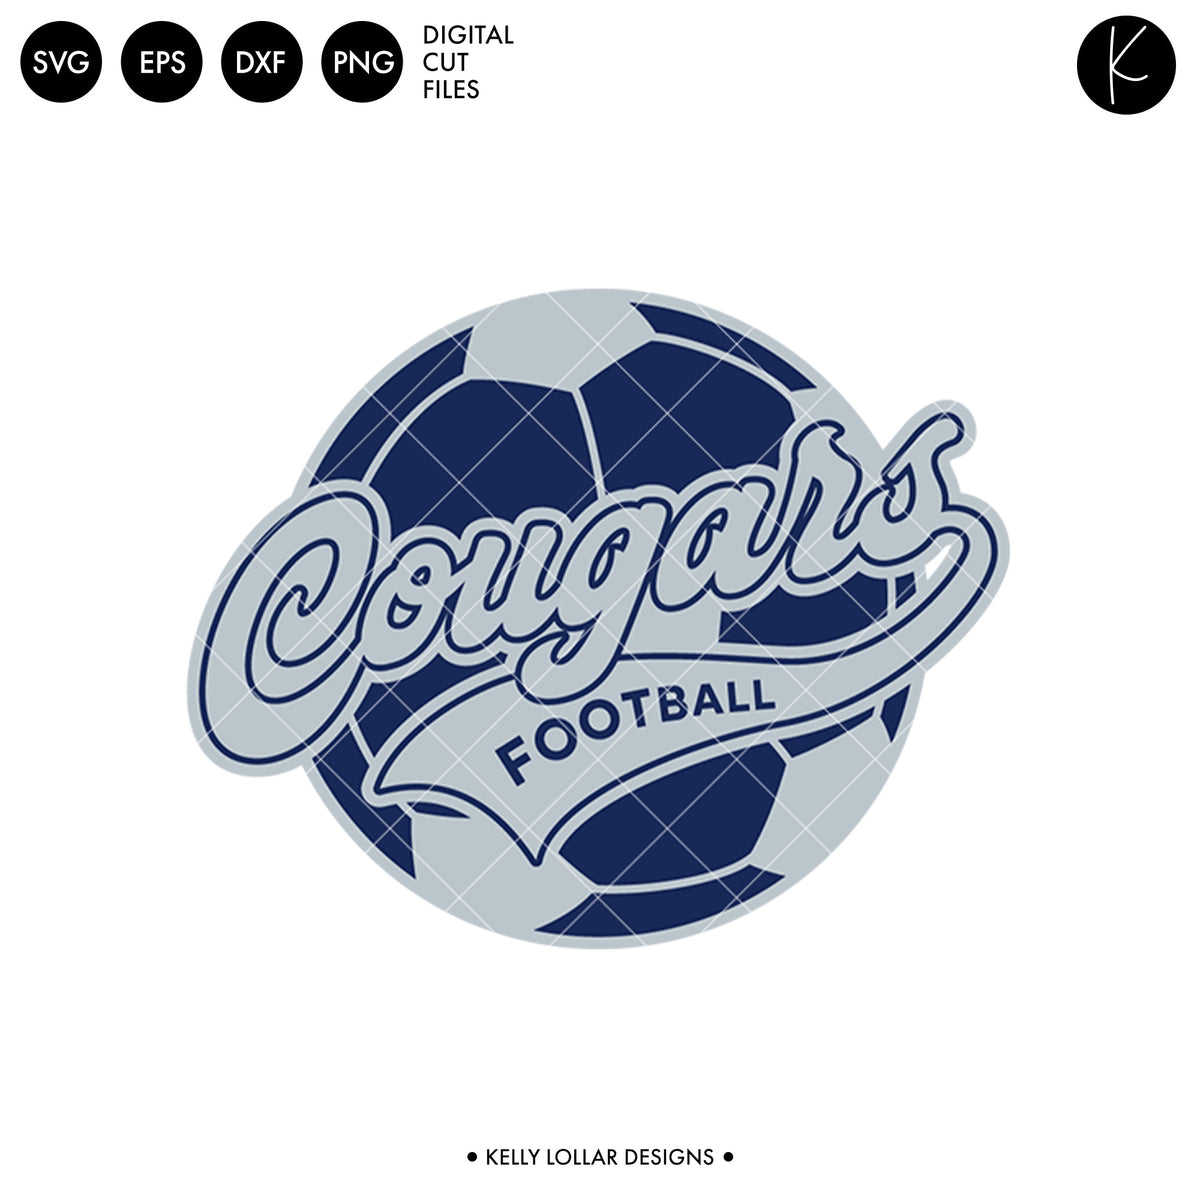 Cougars Soccer and Football Bundle | SVG DXF EPS PNG Cut Files